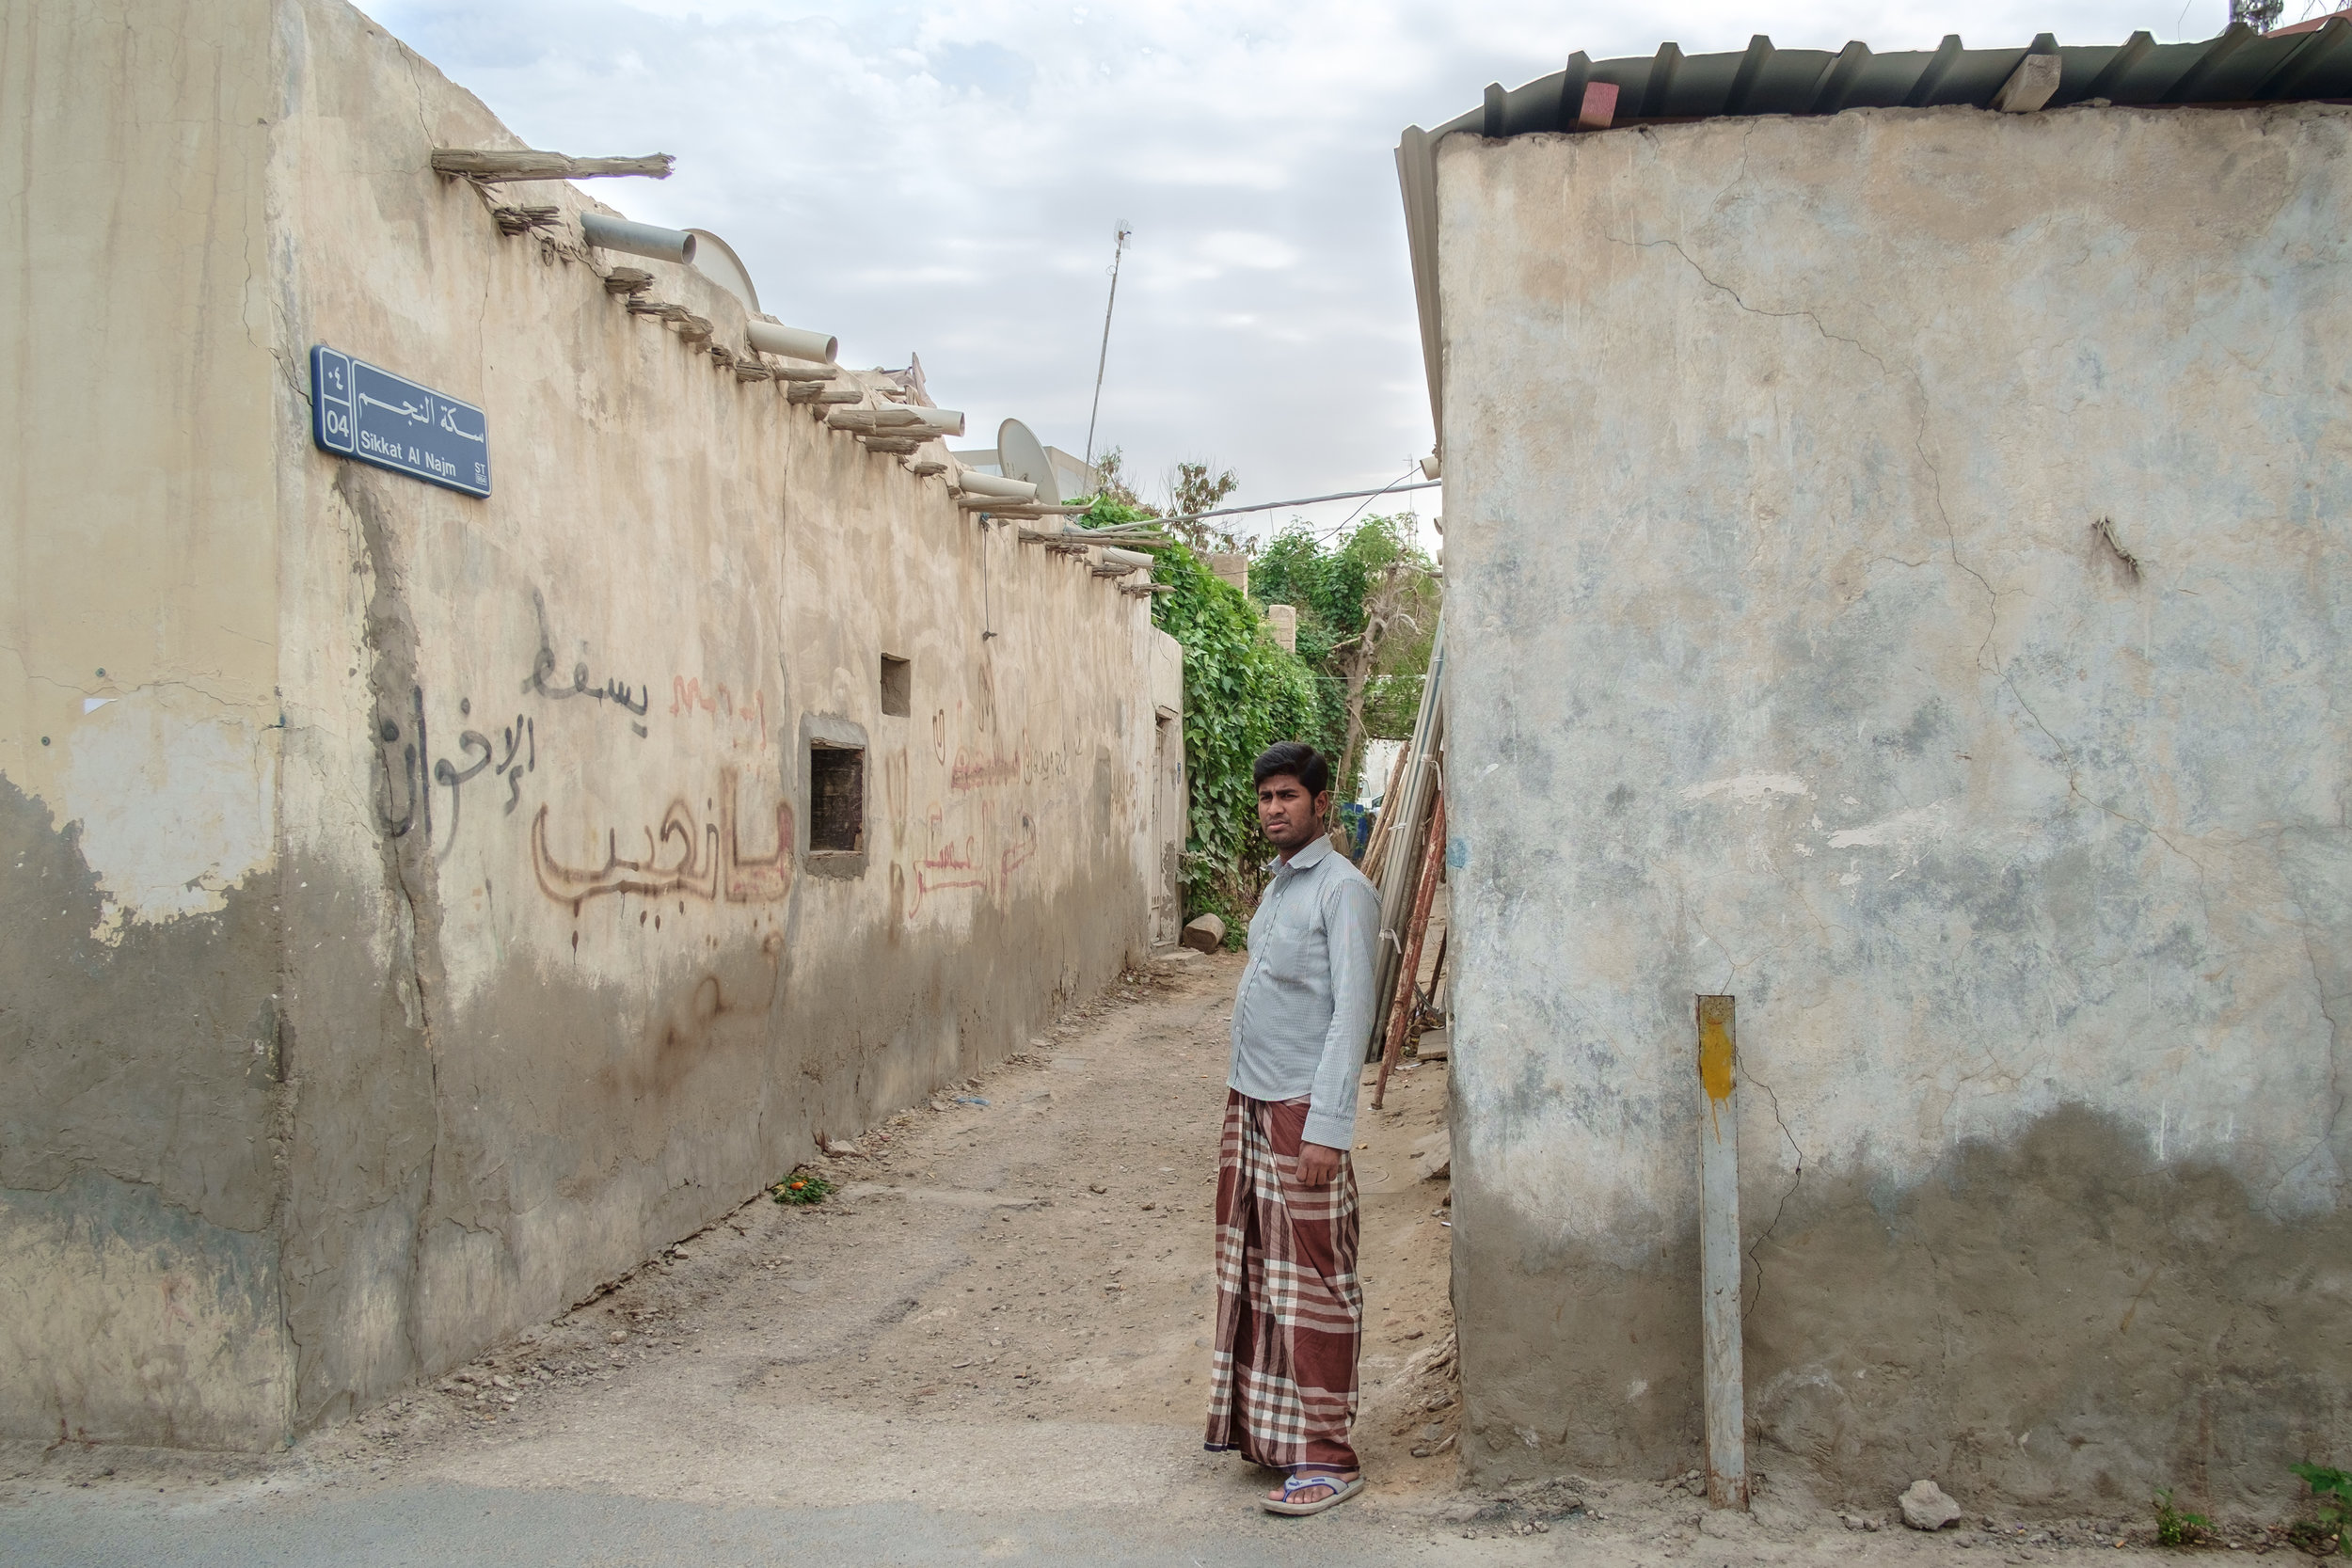  A blue-collar expat is seen in the old Musheireb neighborhood of Doha. Much of this neighborhood has been torn down, and the residents forcibly removed, in order to build the New Msheireb development. Qatar is in a race to revitalize and modernize i